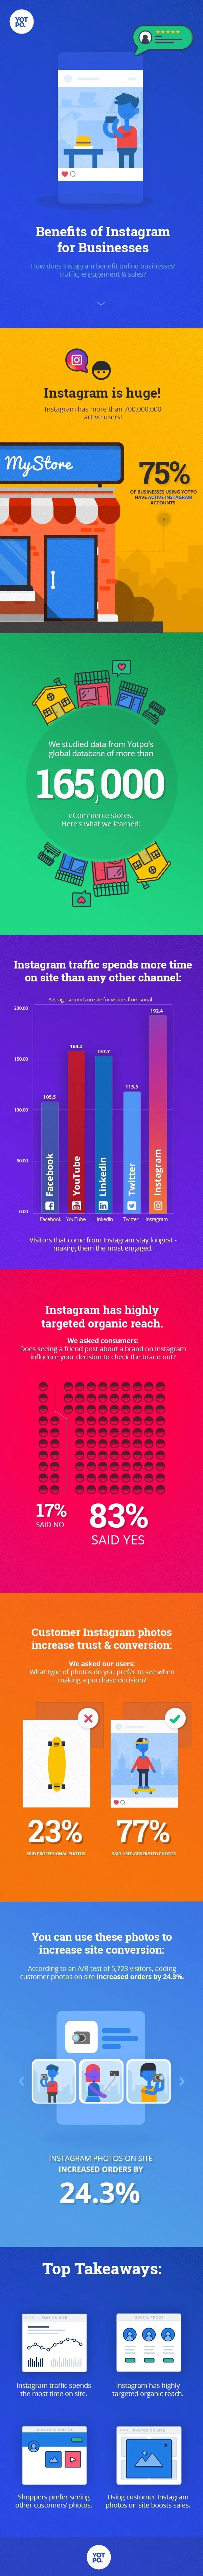 Benefits of Instagram for Businesses - #Infographic